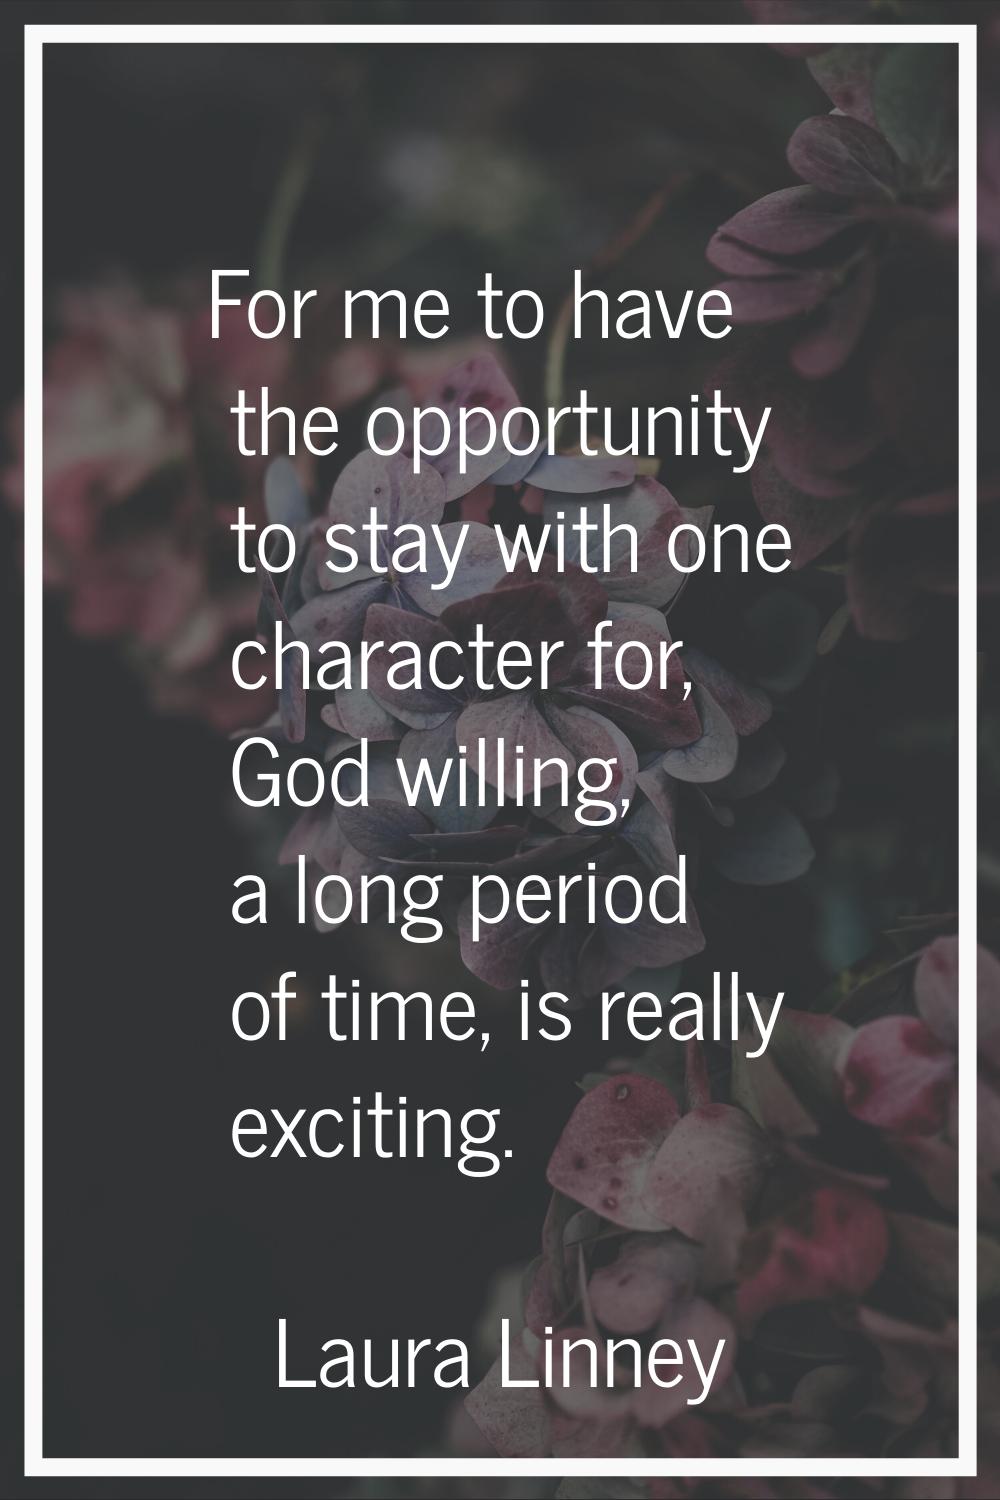 For me to have the opportunity to stay with one character for, God willing, a long period of time, 